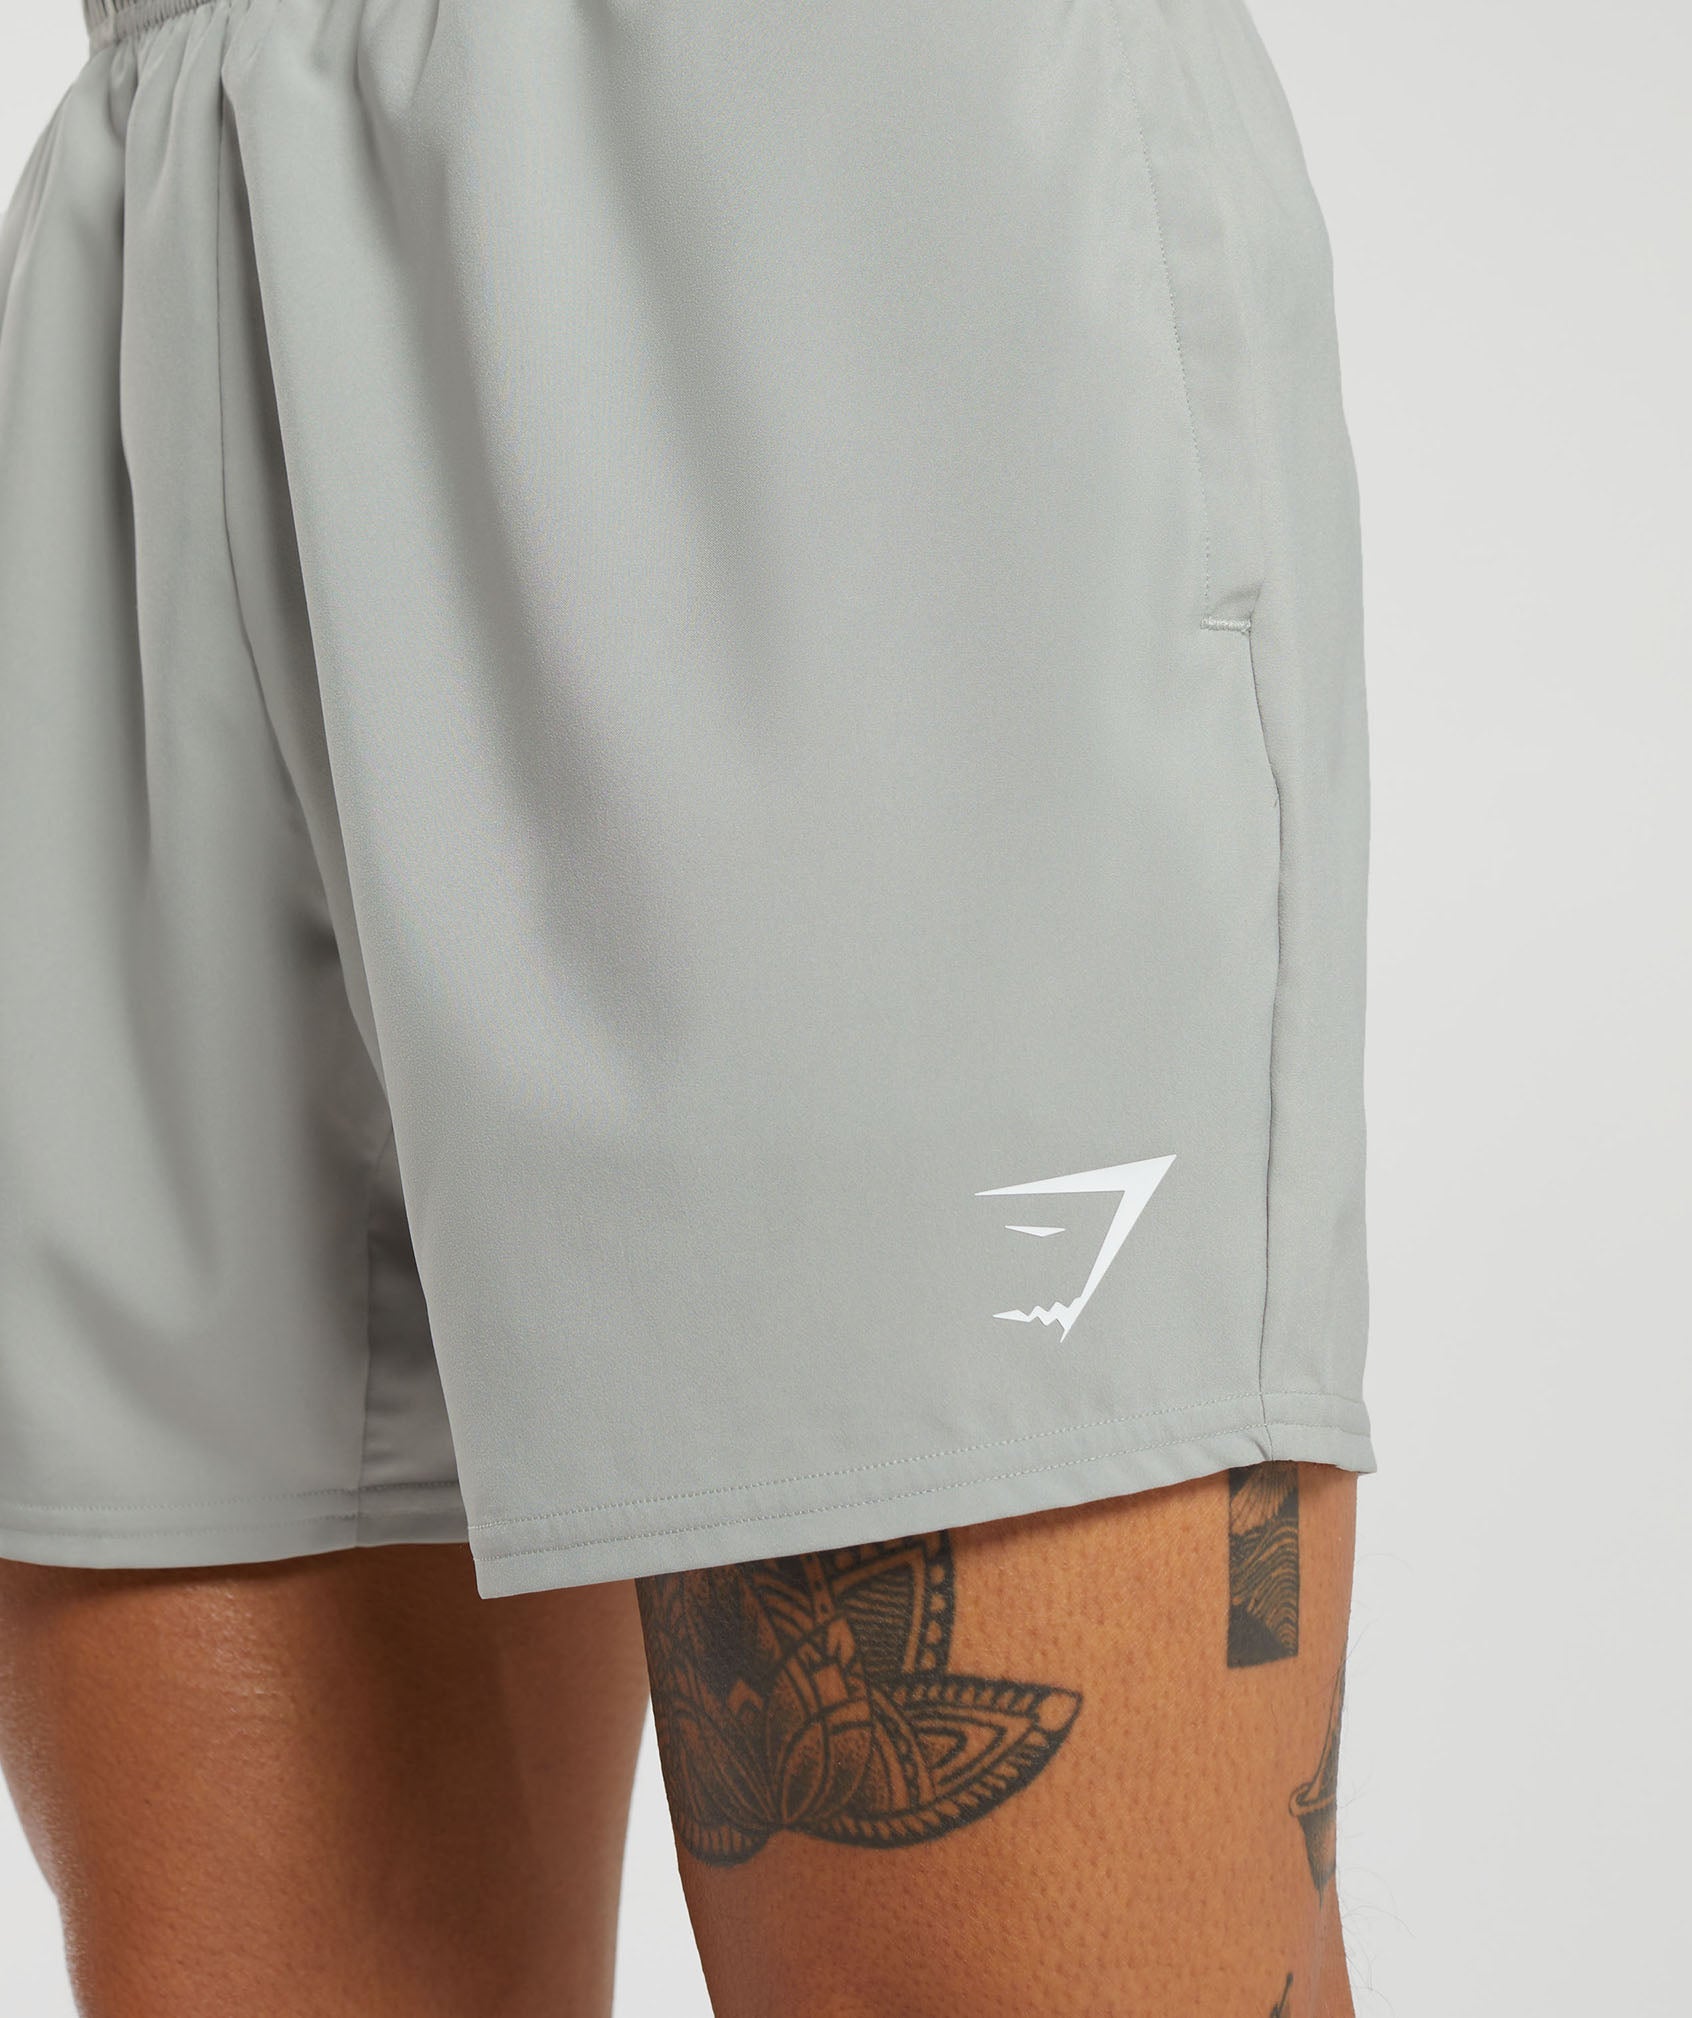 Arrival 5" Shorts product image 5